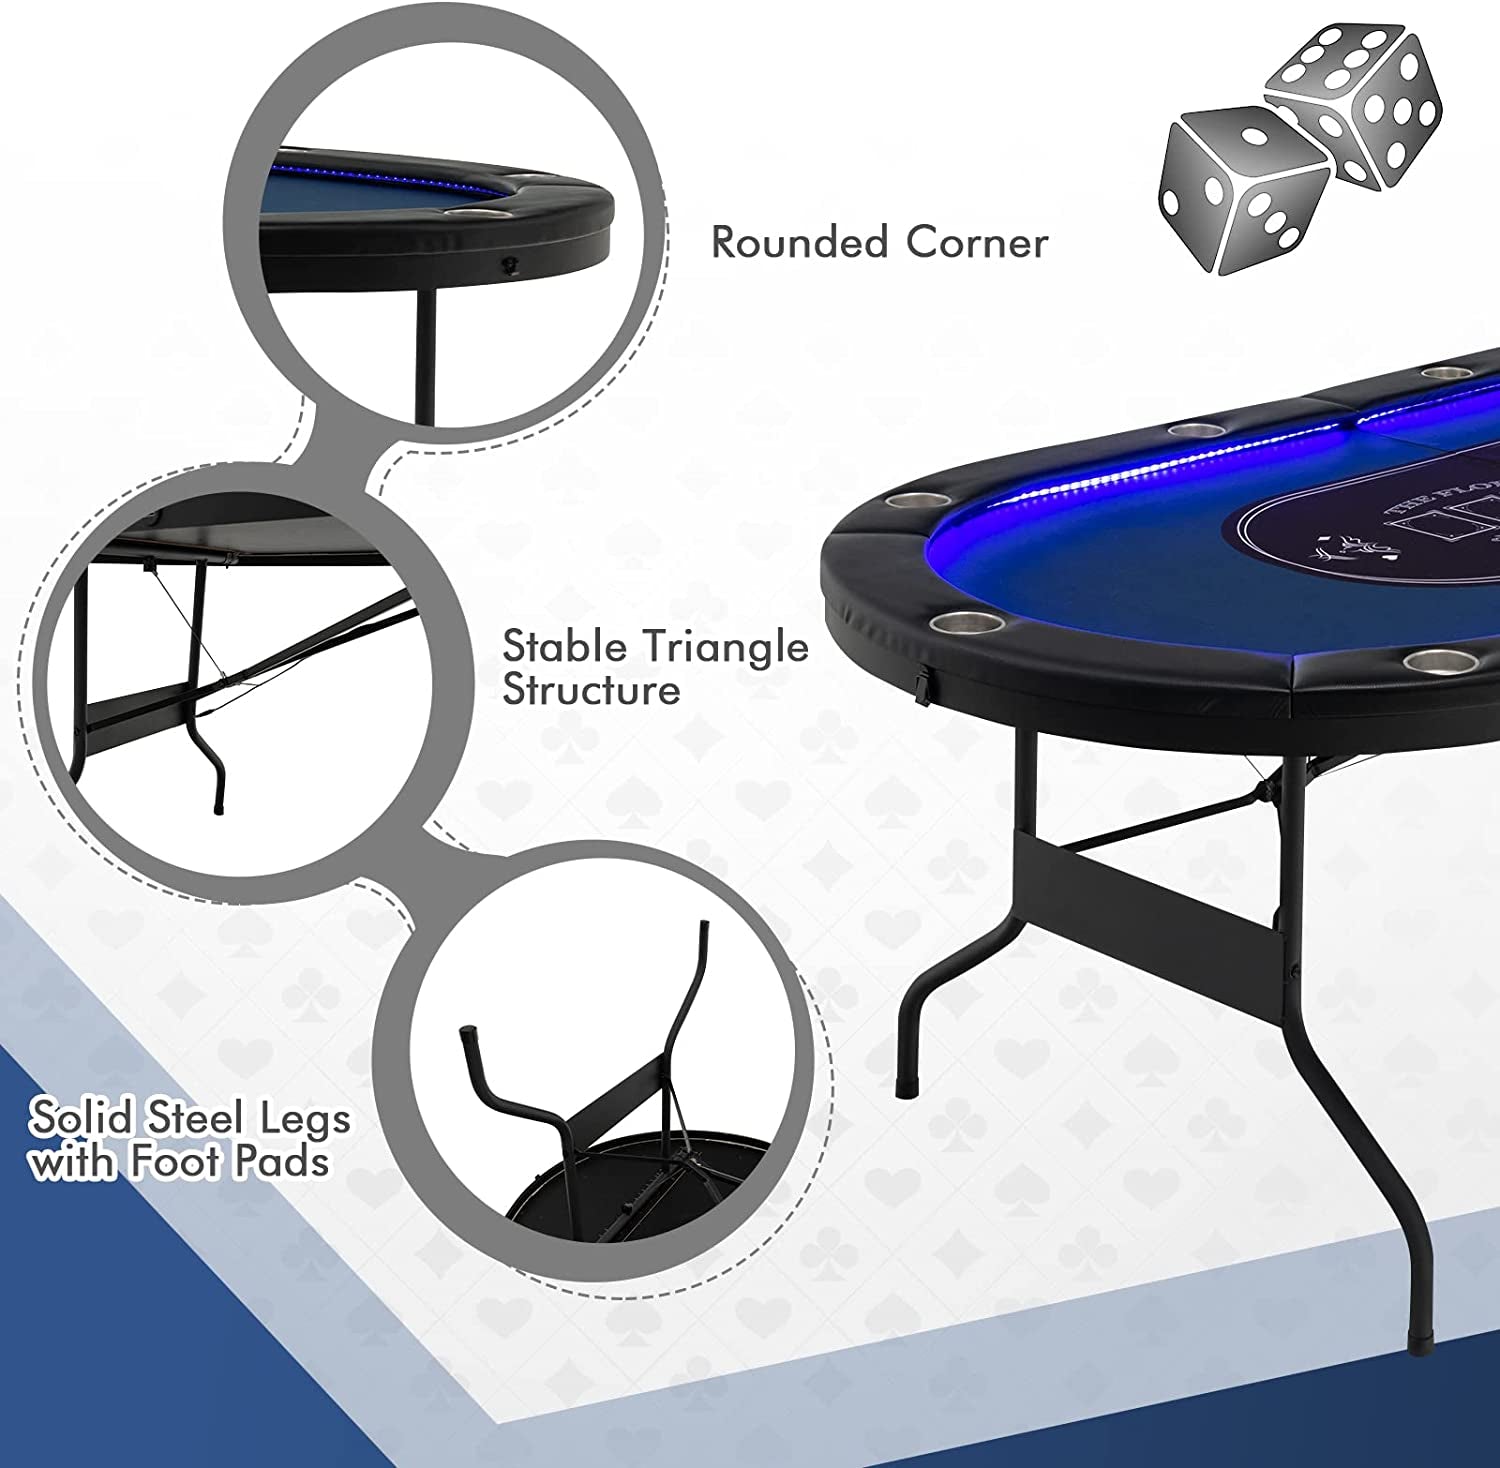 10 Players Poker Table with Cup Holder, Folding Casino Leisure Table with 4 USB Ports, Extra Lights, Easy to Assemble, Foldable Game Poker Tables for Texas, Card Games, Blue